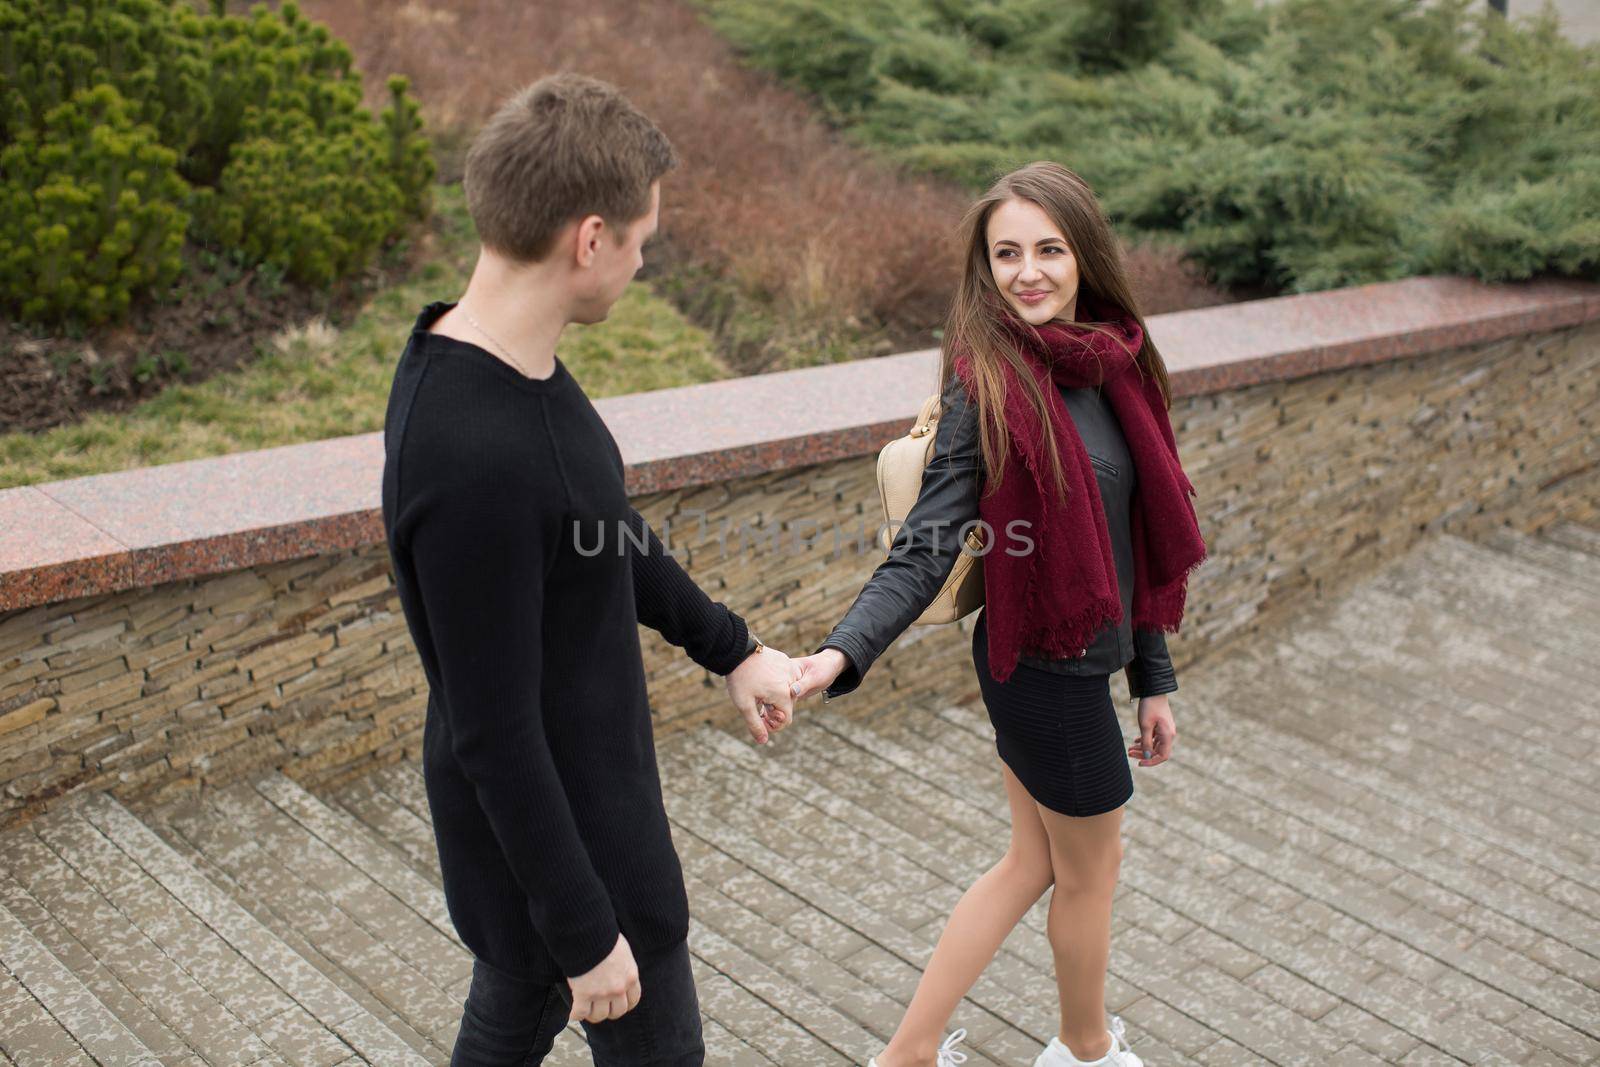 A beautiful woman and a man walk in the park by the hand. by StudioPeace